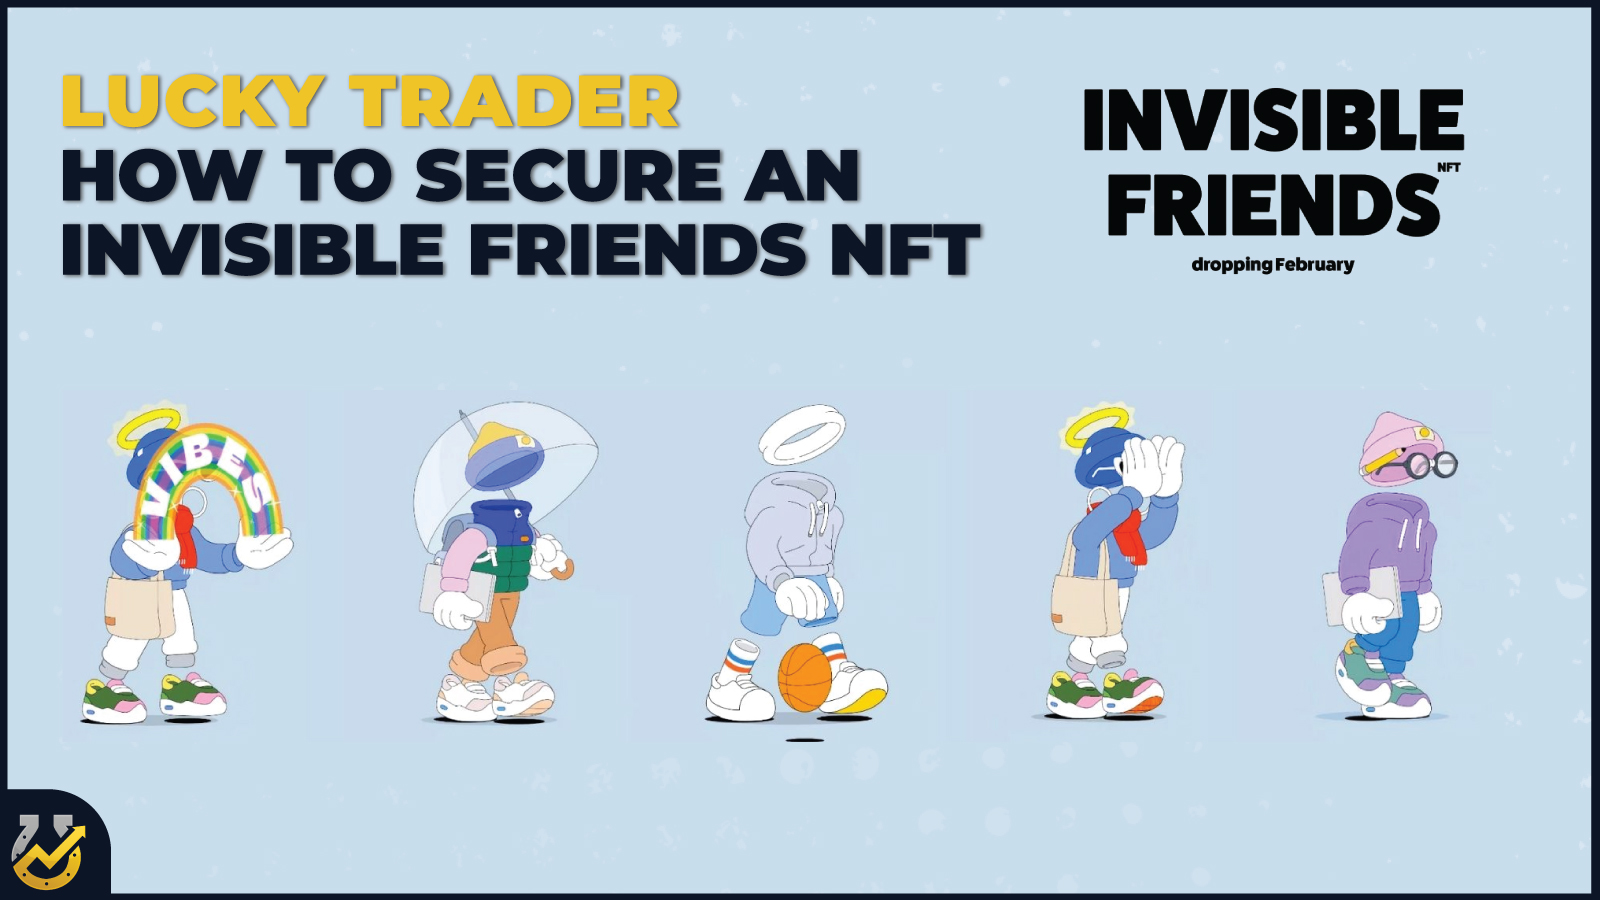 How To Secure An Invisible Friends NFT